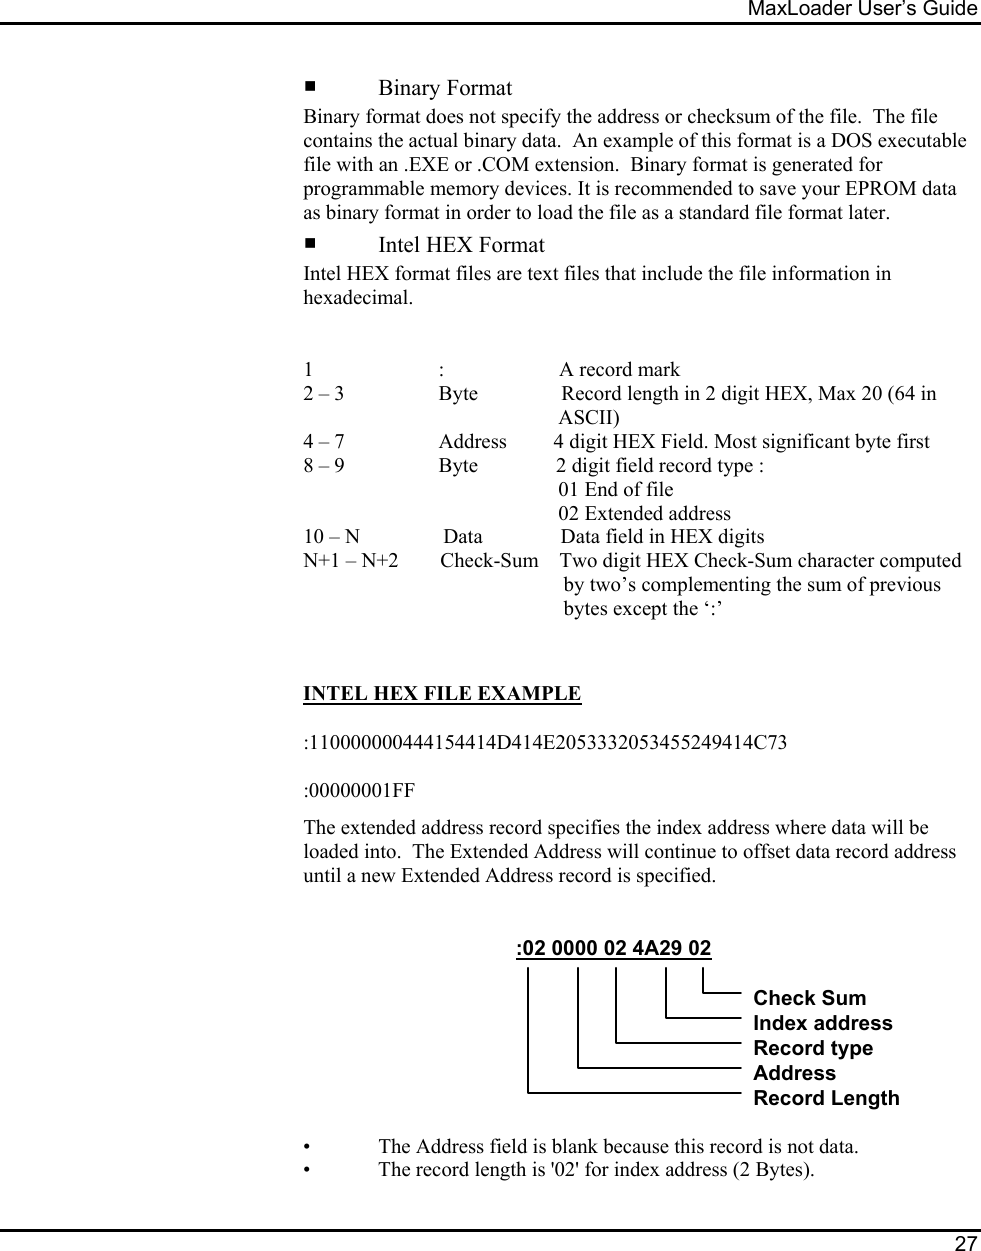 MaxLoader User’s Guide  27       Binary Format Binary format does not specify the address or checksum of the file.  The file contains the actual binary data.  An example of this format is a DOS executable file with an .EXE or .COM extension.  Binary format is generated for programmable memory devices. It is recommended to save your EPROM data as binary format in order to load the file as a standard file format later.    Intel HEX Format Intel HEX format files are text files that include the file information in hexadecimal.      1                        :                      A record mark 2 – 3                  Byte                Record length in 2 digit HEX, Max 20 (64 in                                                   ASCII)   4 – 7                  Address         4 digit HEX Field. Most significant byte first    8 – 9                  Byte               2 digit field record type :                                                  01 End of file                                                     02 Extended address   10 – N                Data               Data field in HEX digits N+1 – N+2        Check-Sum    Two digit HEX Check-Sum character computed                                                    by two’s complementing the sum of previous                                                    bytes except the ‘:’    INTEL HEX FILE EXAMPLE  :110000000444154414D414E2053332053455249414C73  :00000001FF The extended address record specifies the index address where data will be loaded into.  The Extended Address will continue to offset data record address until a new Extended Address record is specified.                                                          :02 0000 02 4A29 02Check SumIndex addressRecord typeAddressRecord Length       •   The Address field is blank because this record is not data.     •   The record length is &apos;02&apos; for index address (2 Bytes). 